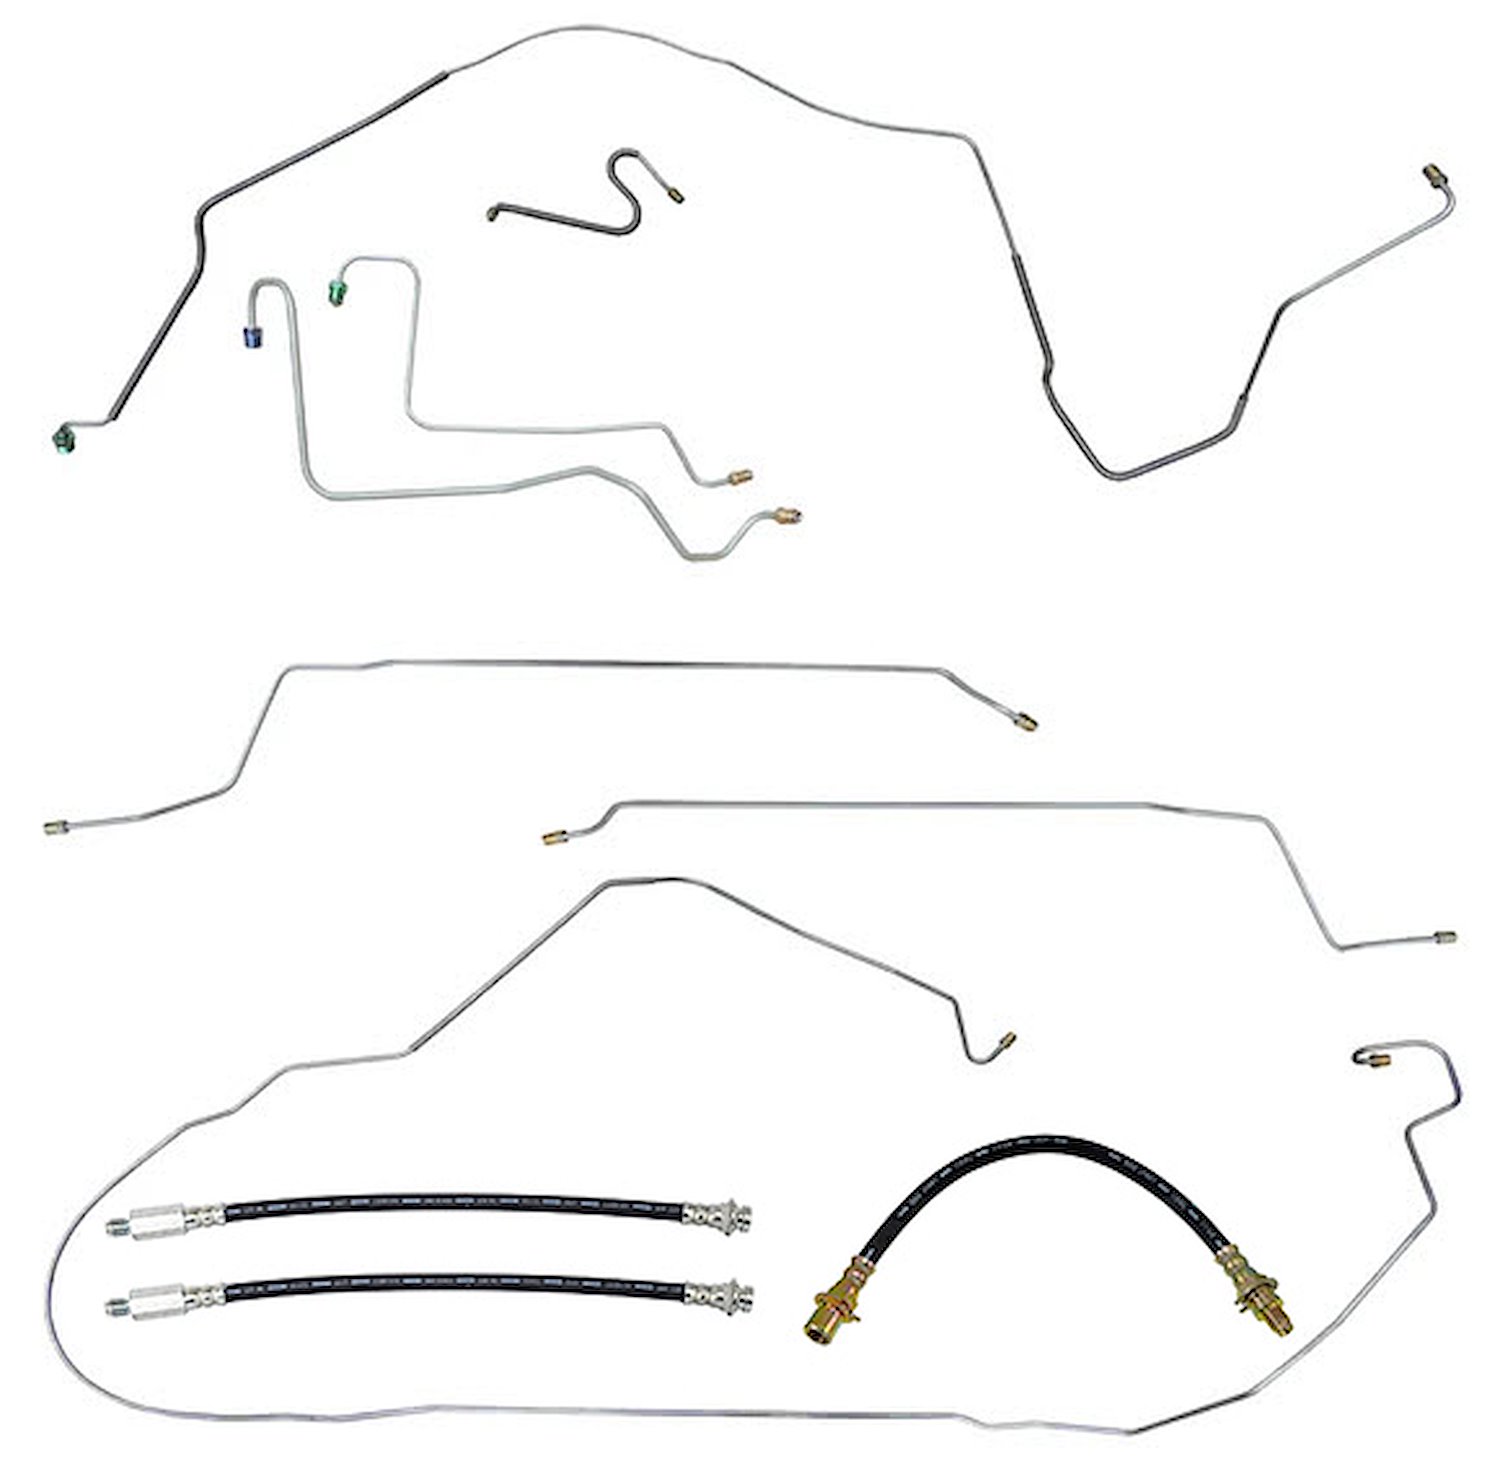 Complete Brake Line & Hose Kit for 1967 Chevy Chevelle, Malibu SS Convertible w/Power Drum Brakes [Stainless Steel]